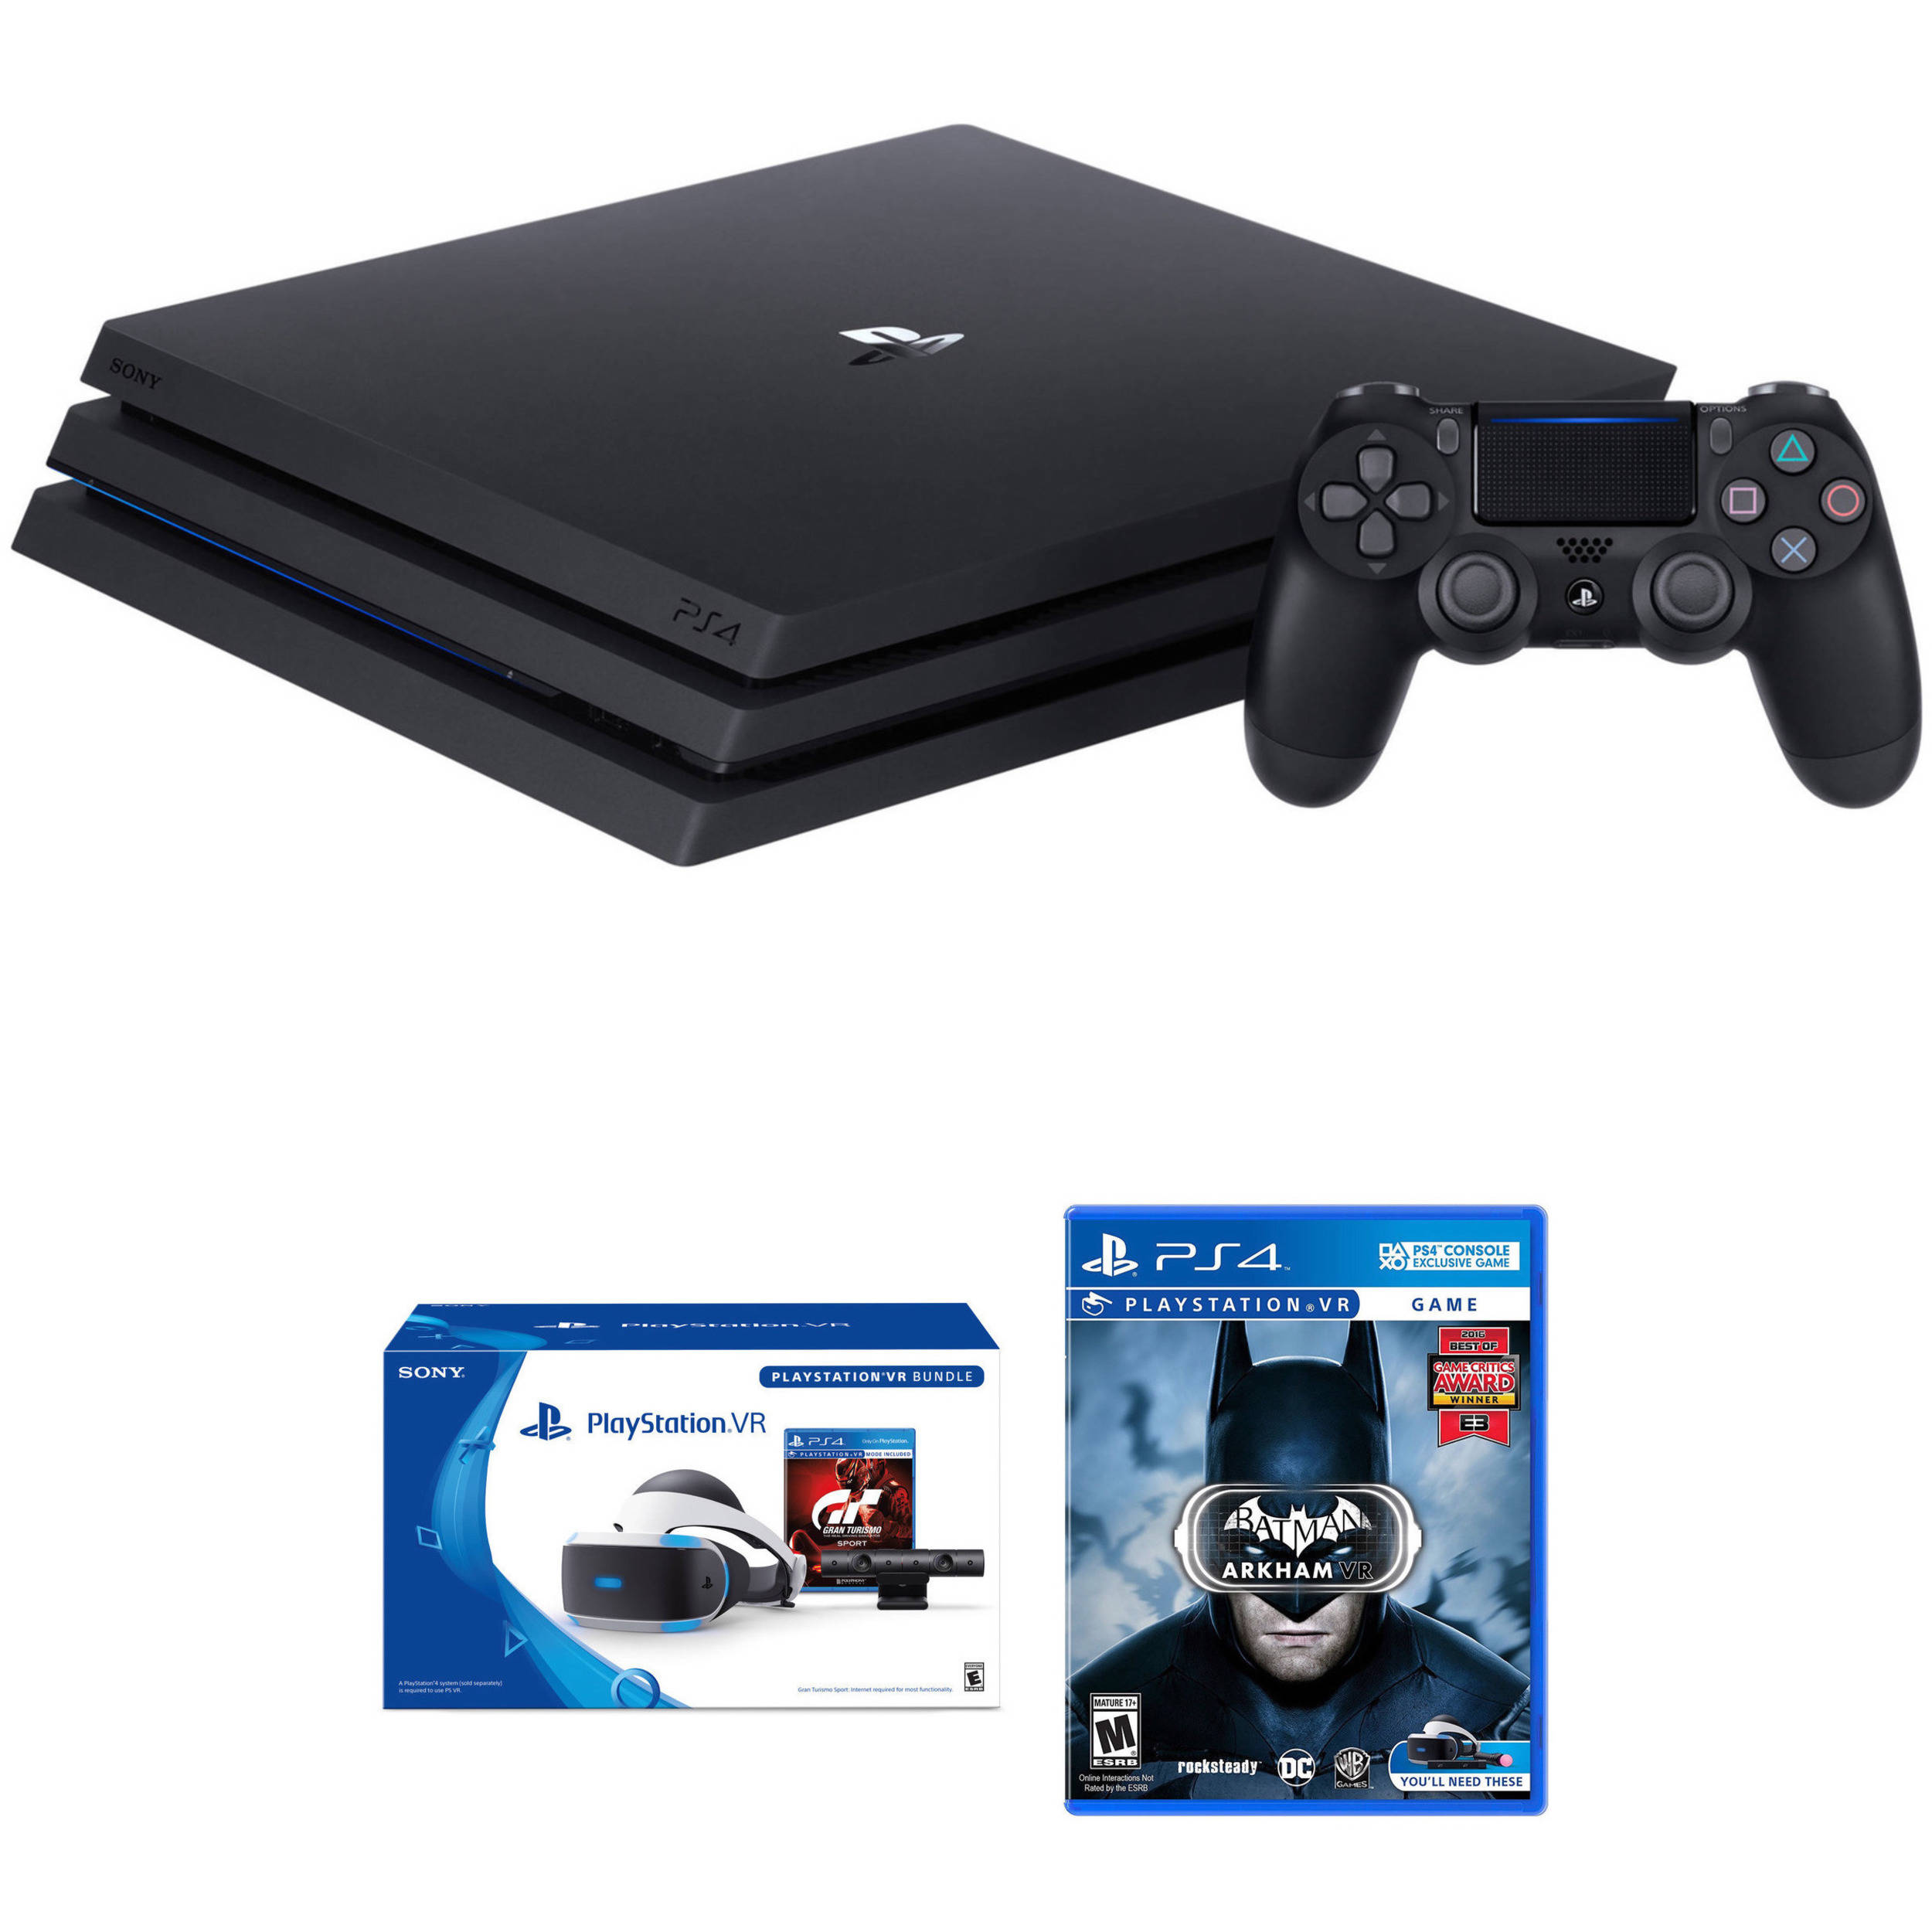 ps4 pro gaming console